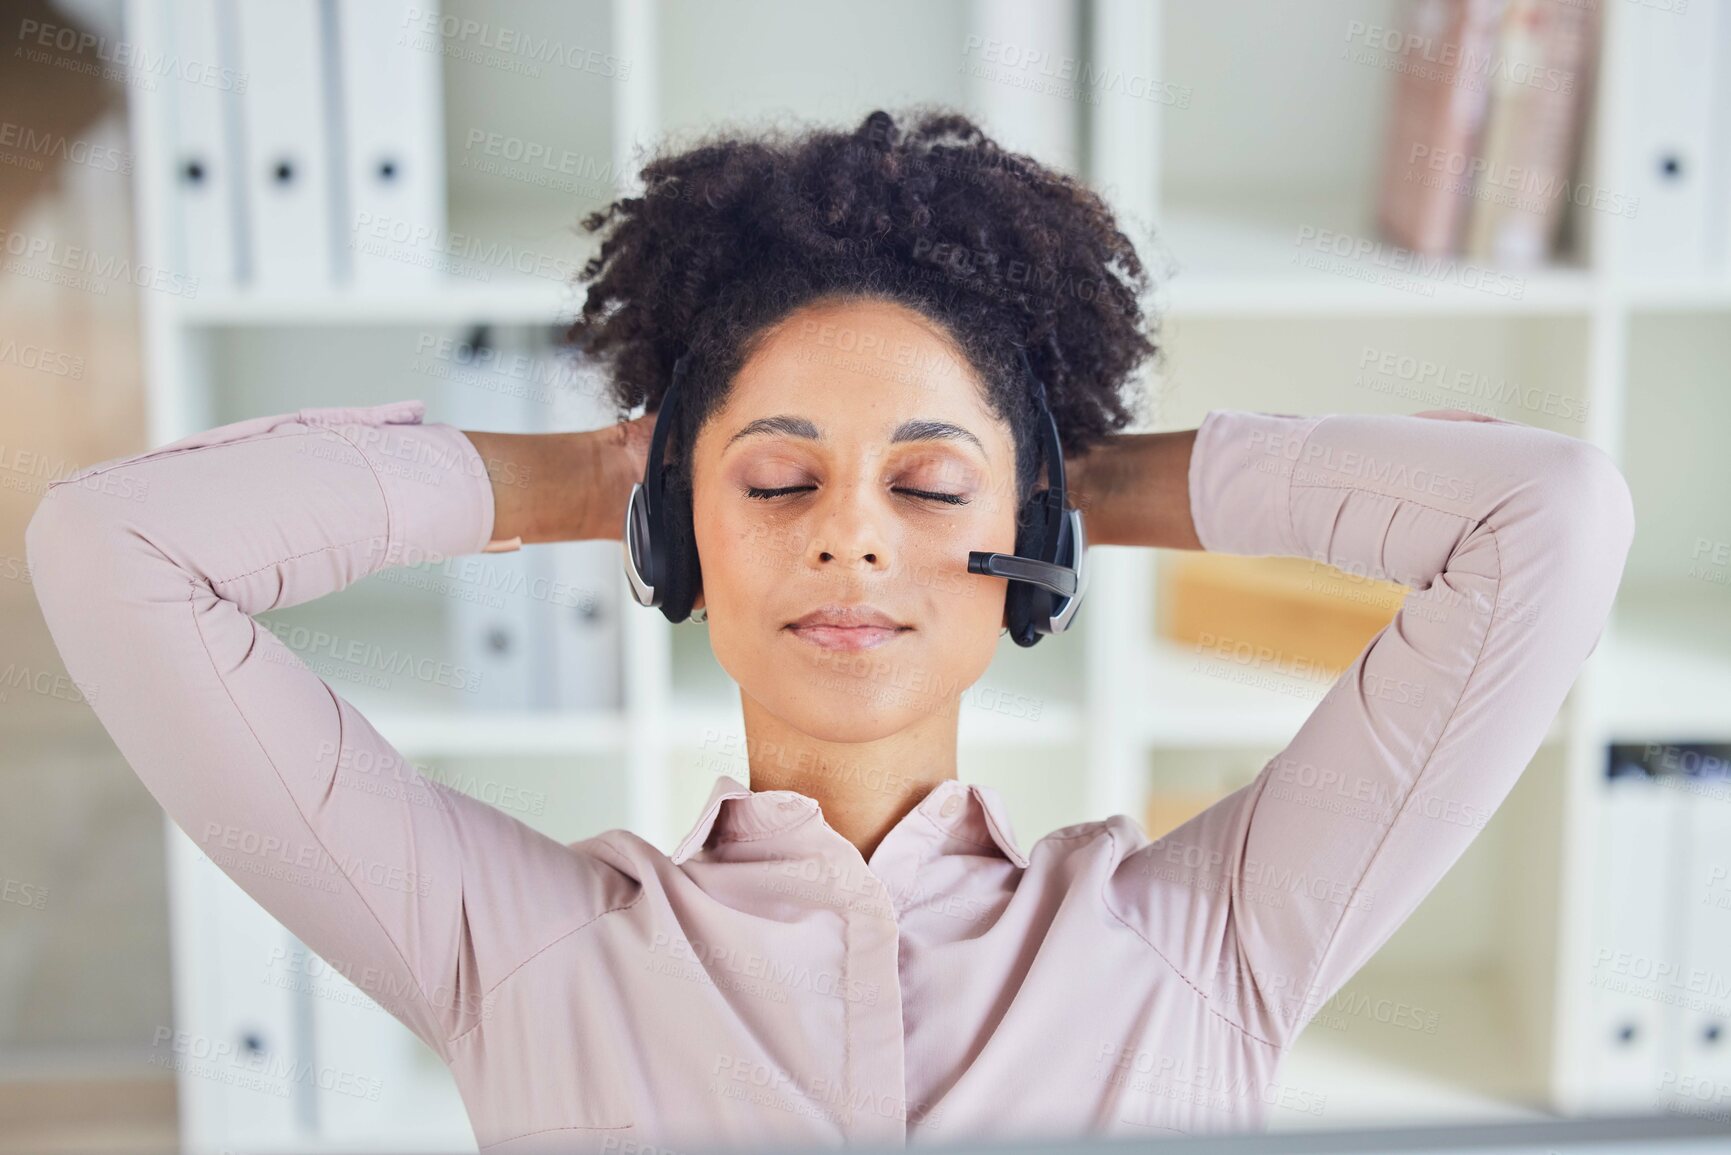 Buy stock photo Relax, call center or tired black woman sleeping at customer services resting at customer services office desk. Nap, breathing or exhausted telemarketing agent relaxing at contact support on a break